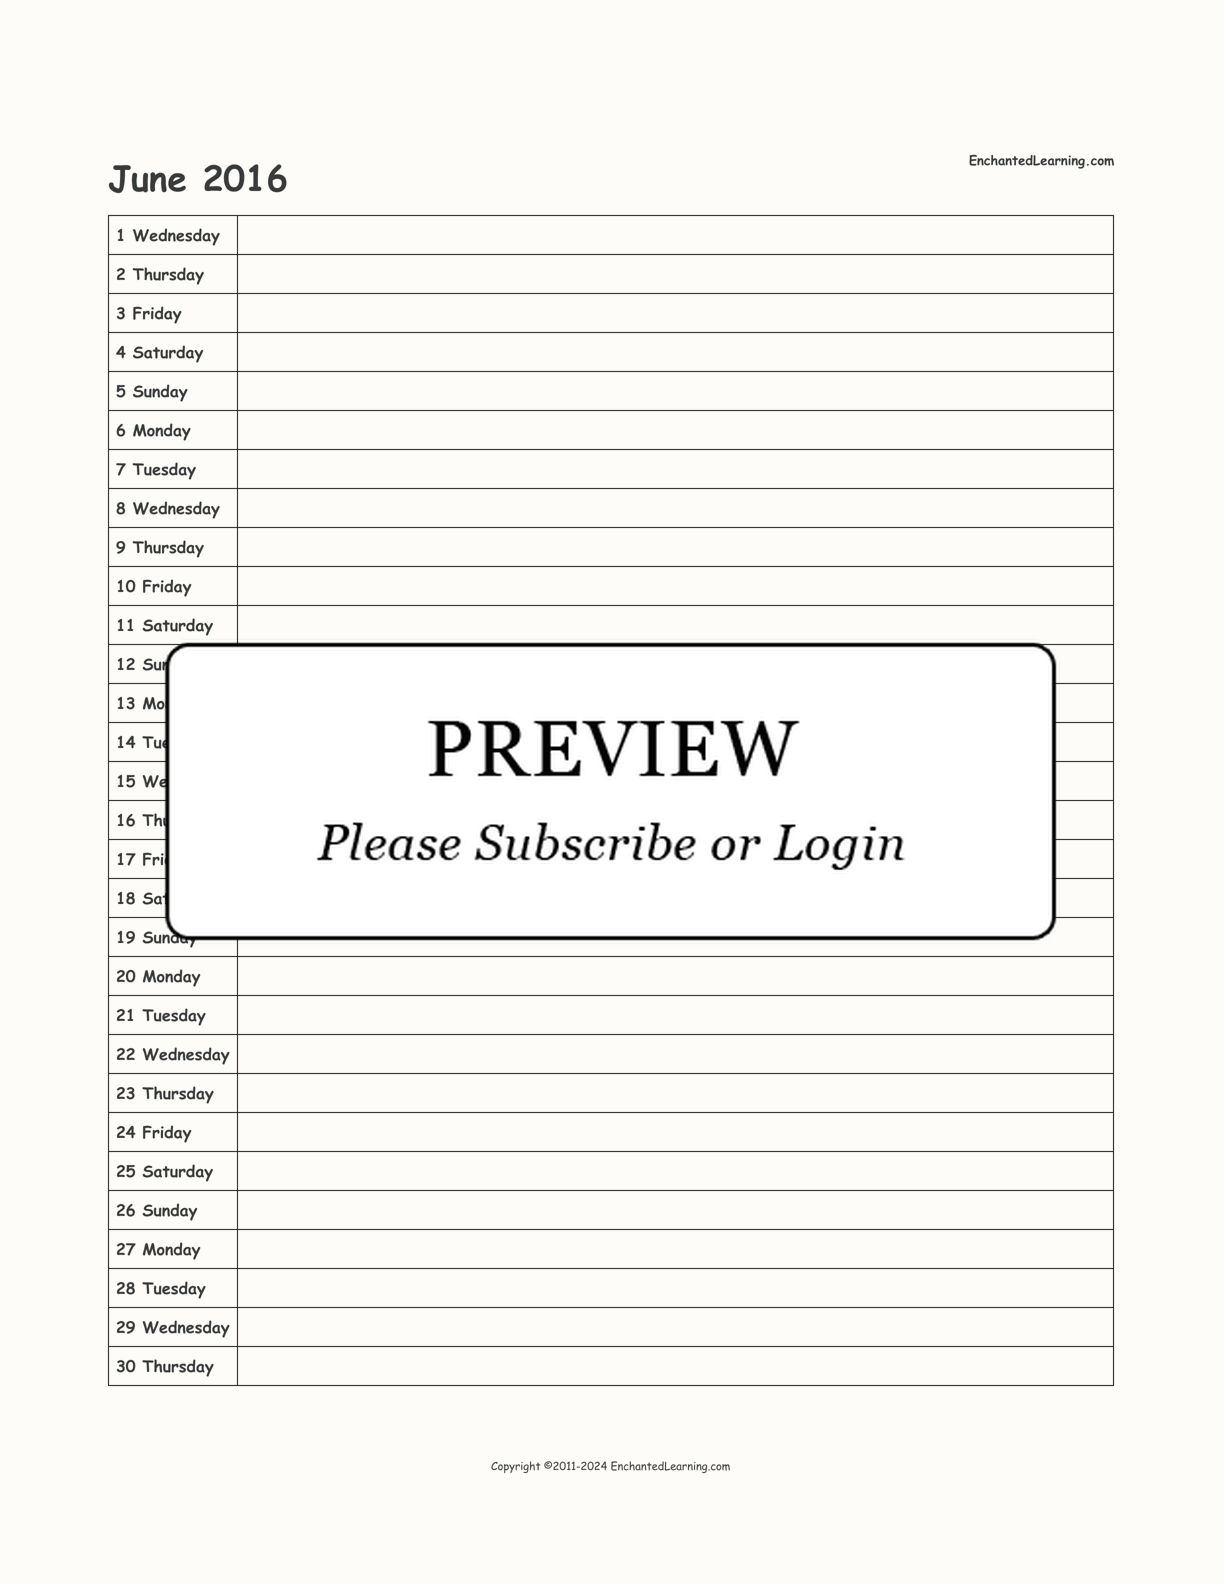 2016 Scheduling Calendar interactive printout page 6